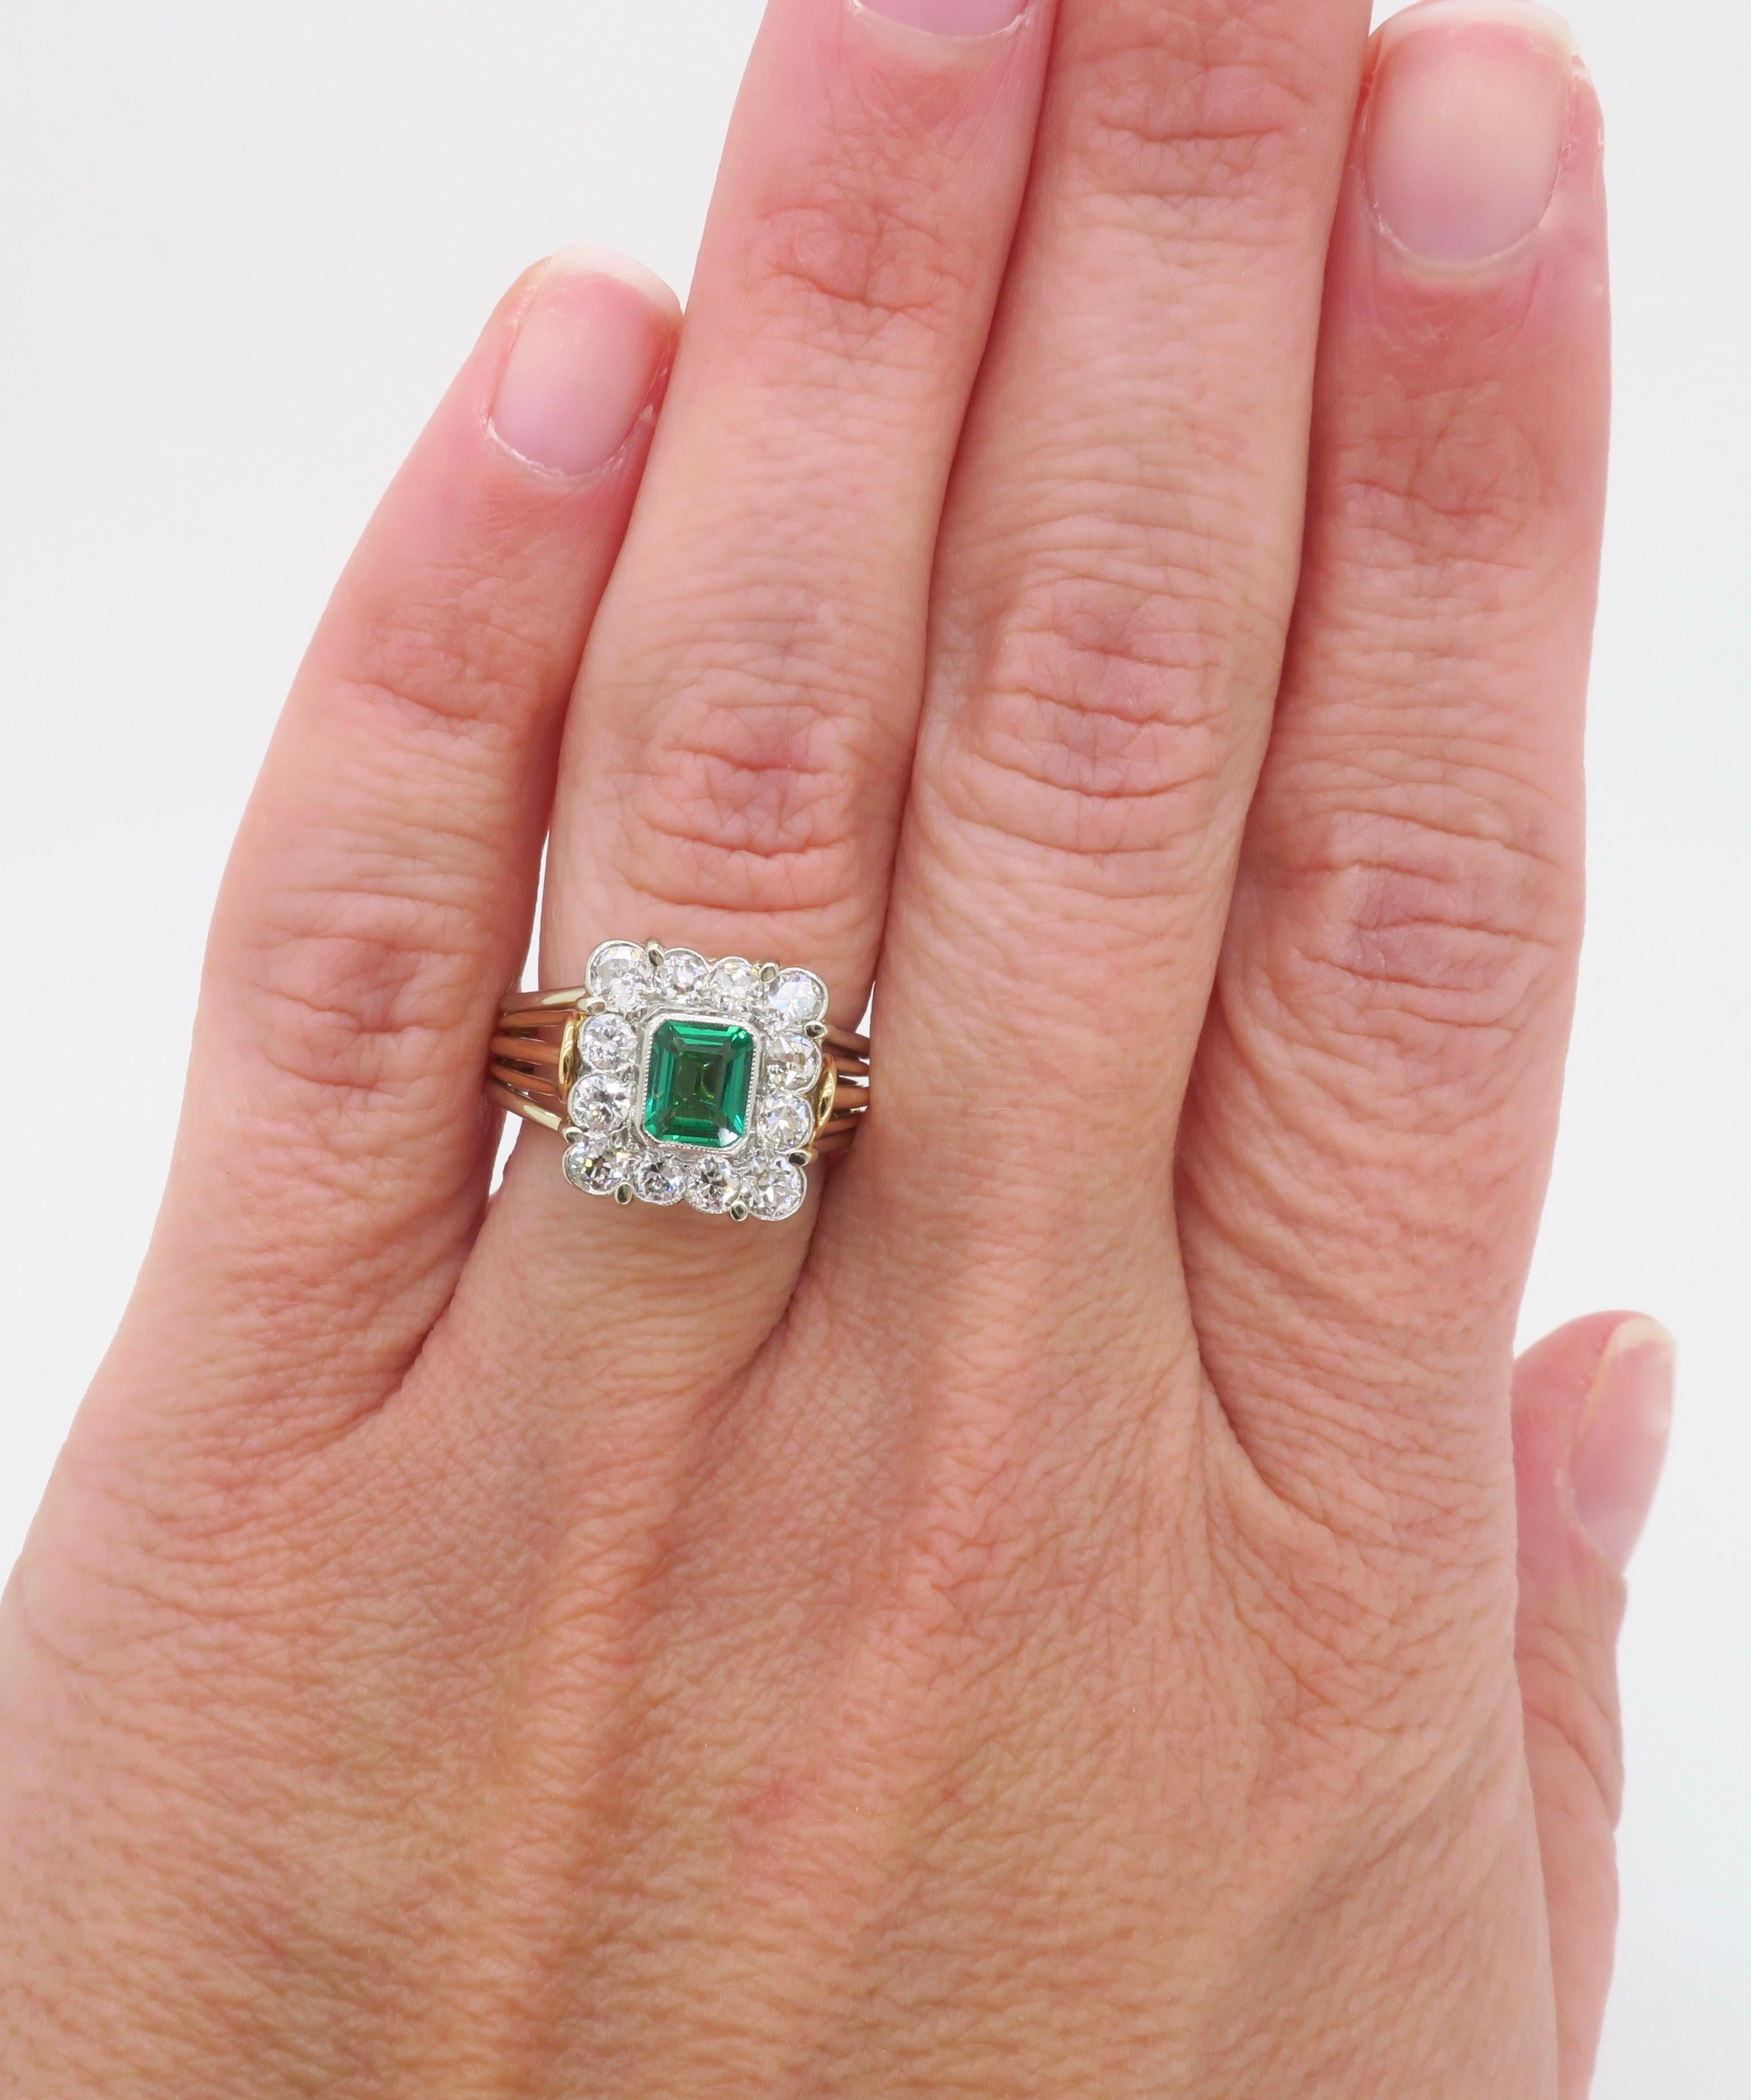 Vintage Emerald & Diamond Ring Crafted in Platinum & 18k Gold  For Sale 1